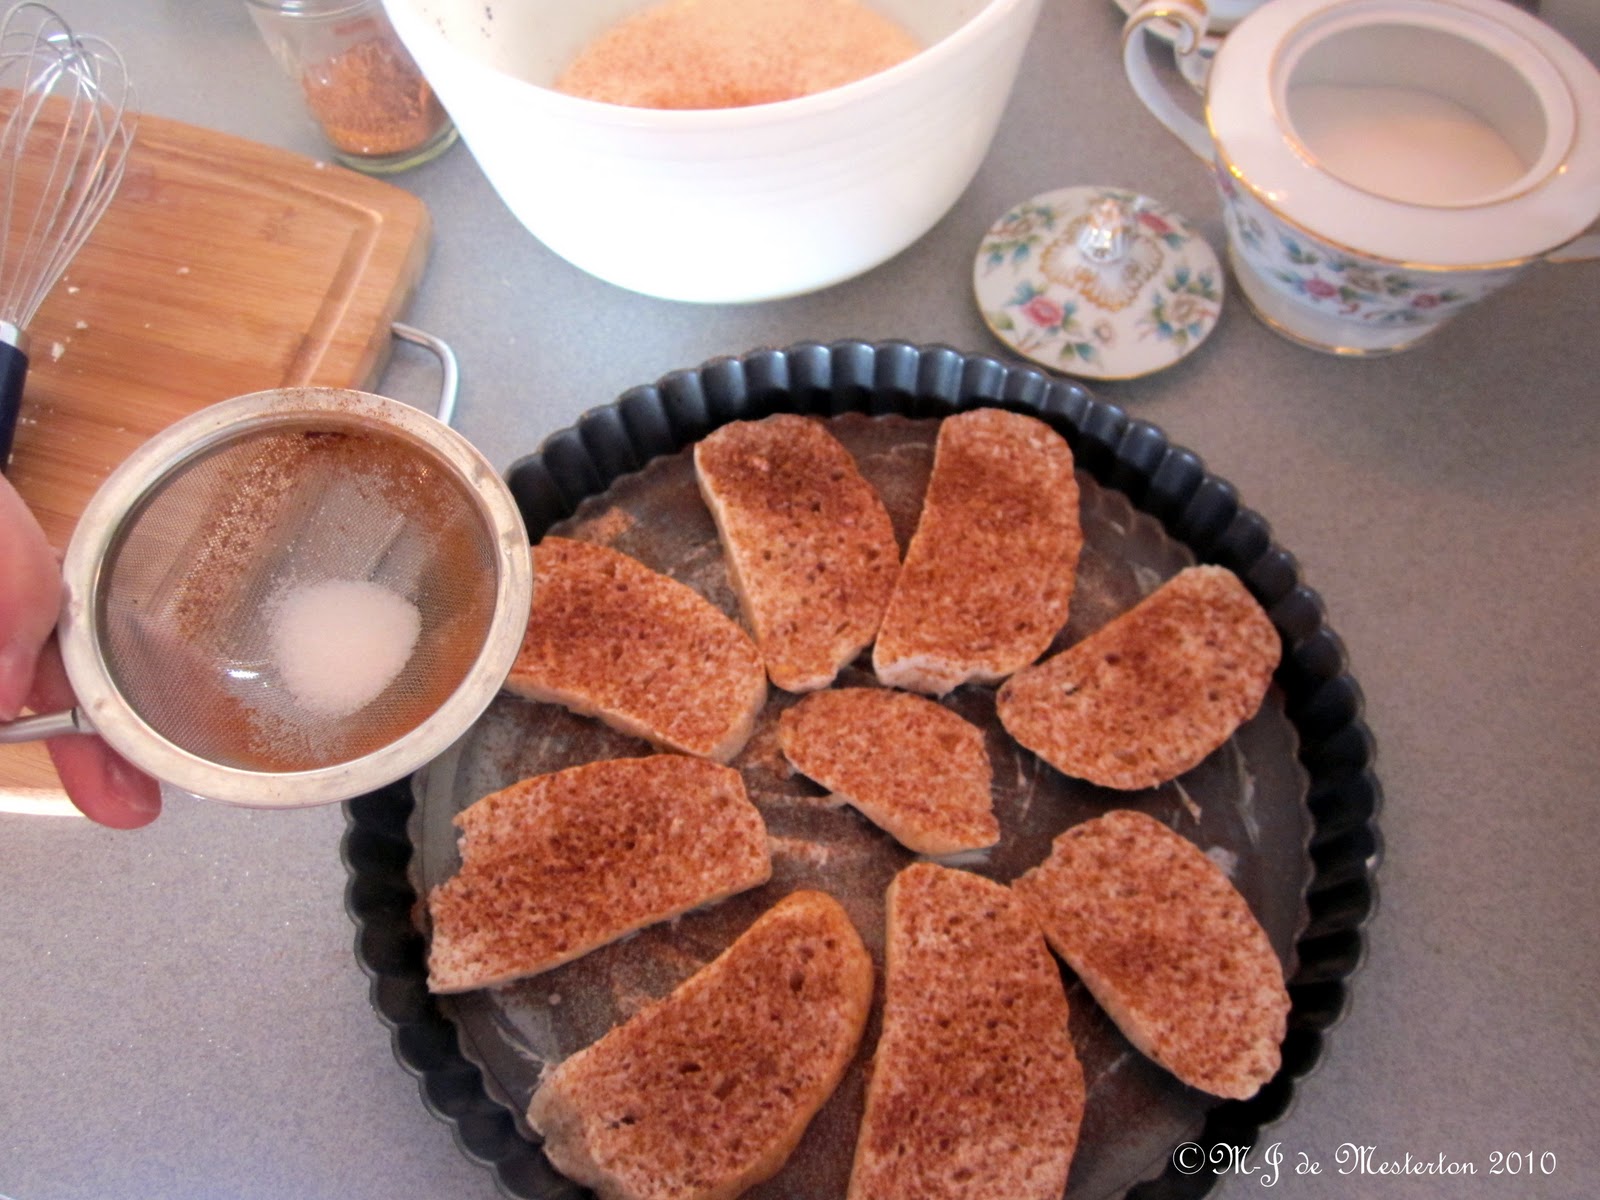 baked and to making for simple, toast are ingredients make The how healthy buttered method cinnamon noodles